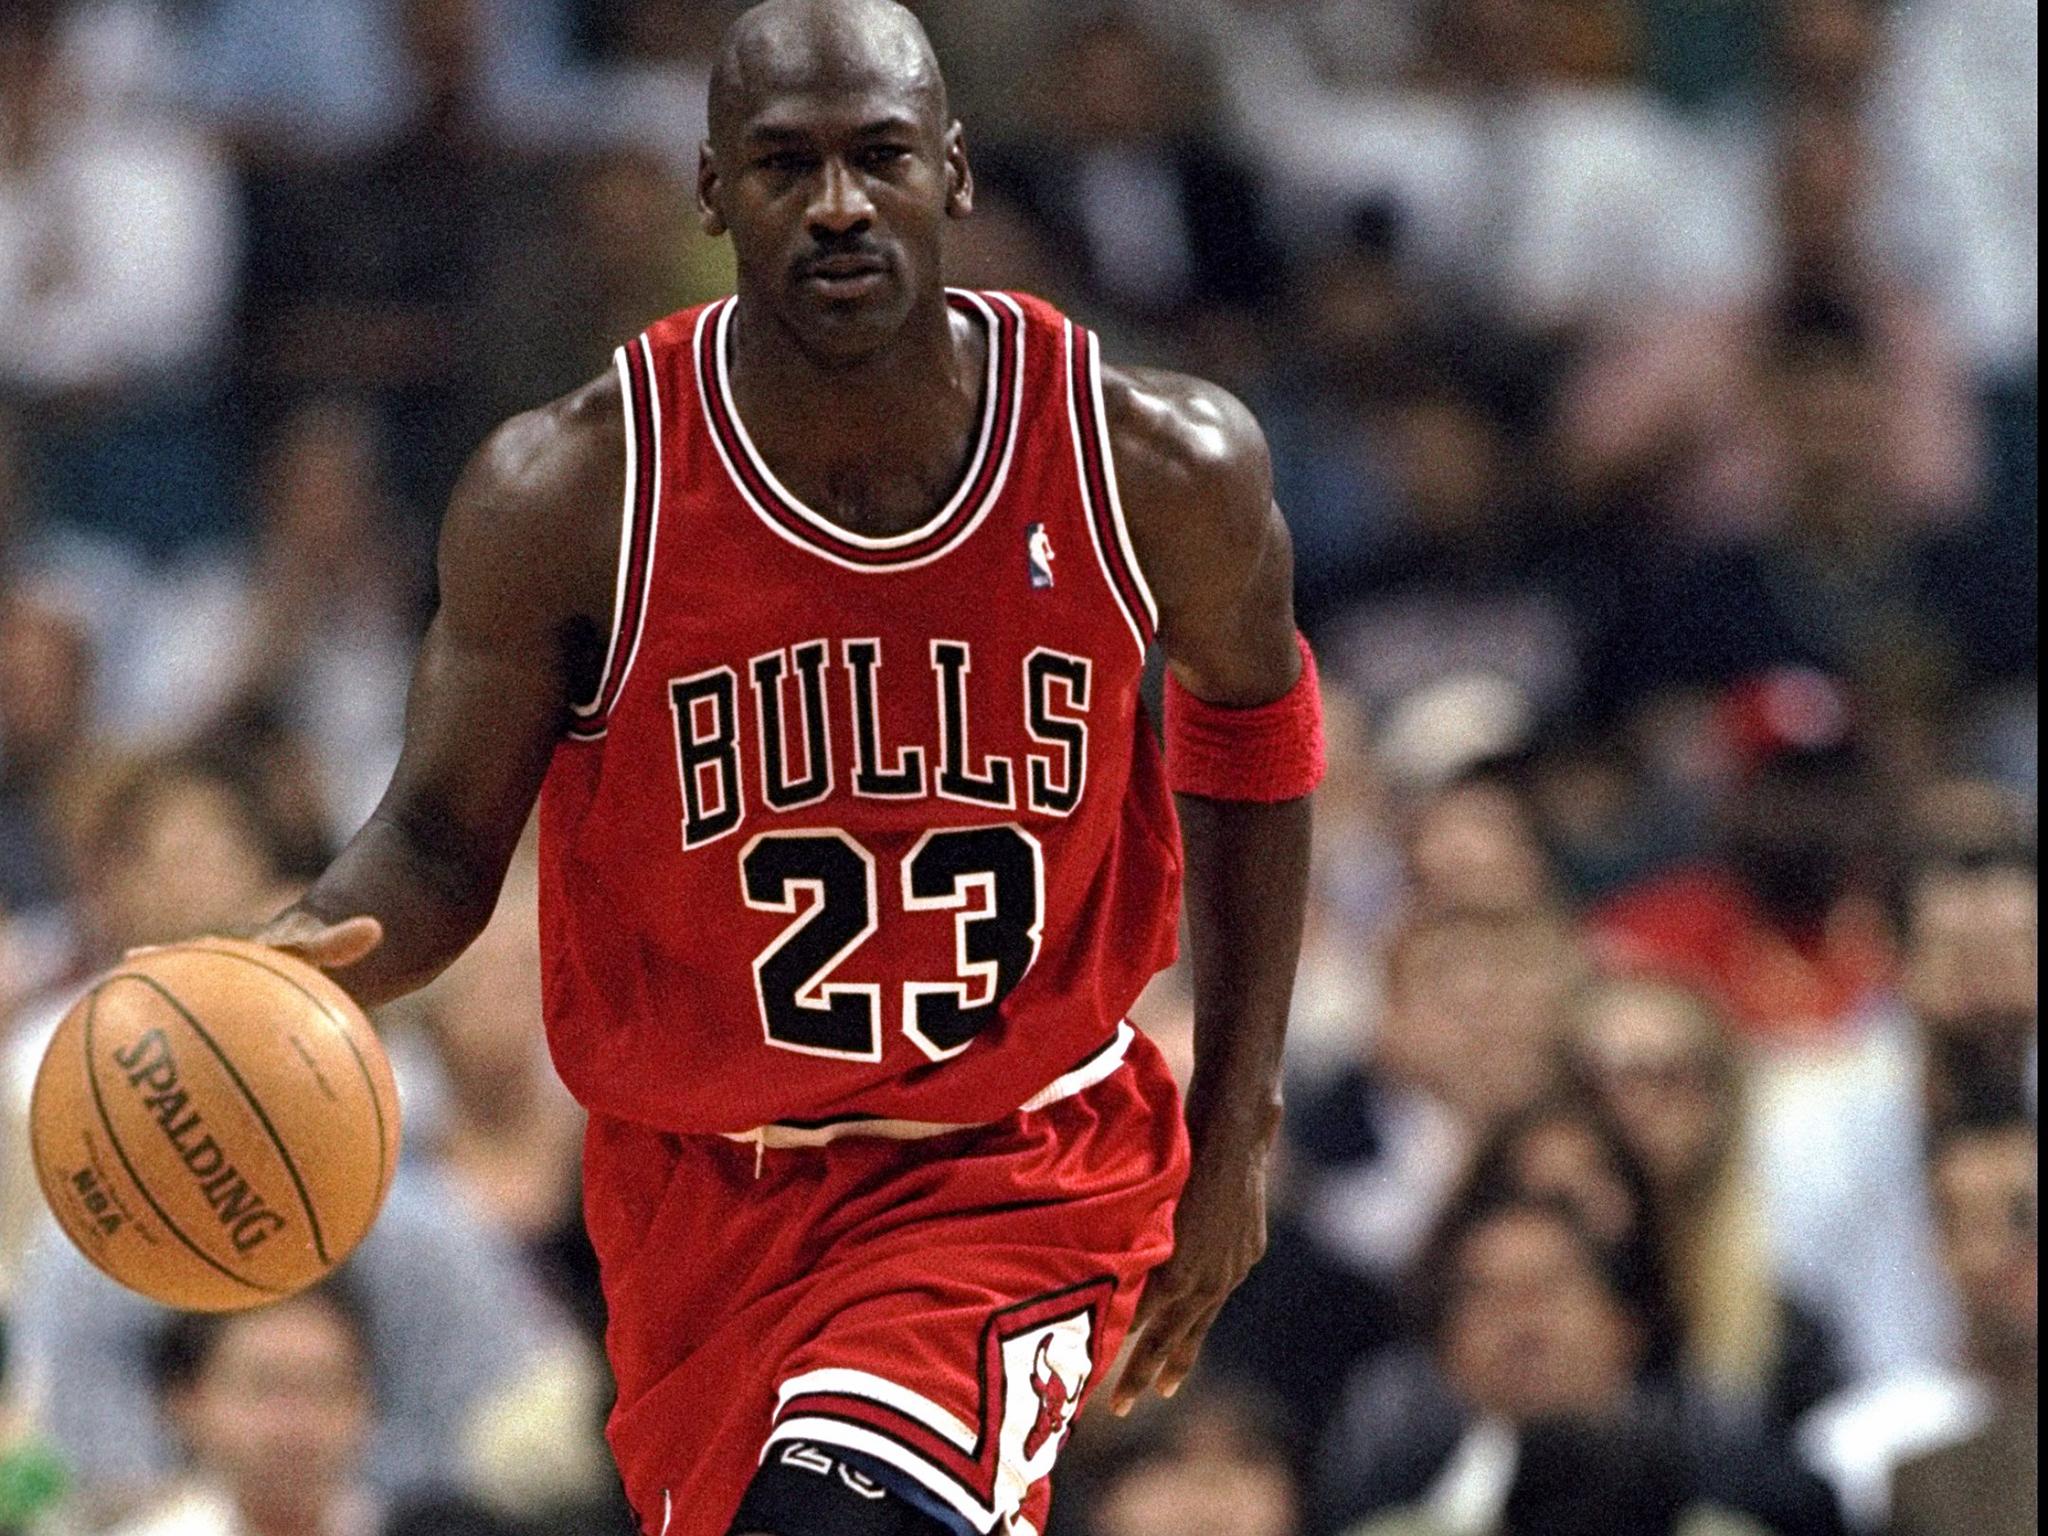 Michael Jordan’s team USA reebok jacket is expected to fetch millions at auction